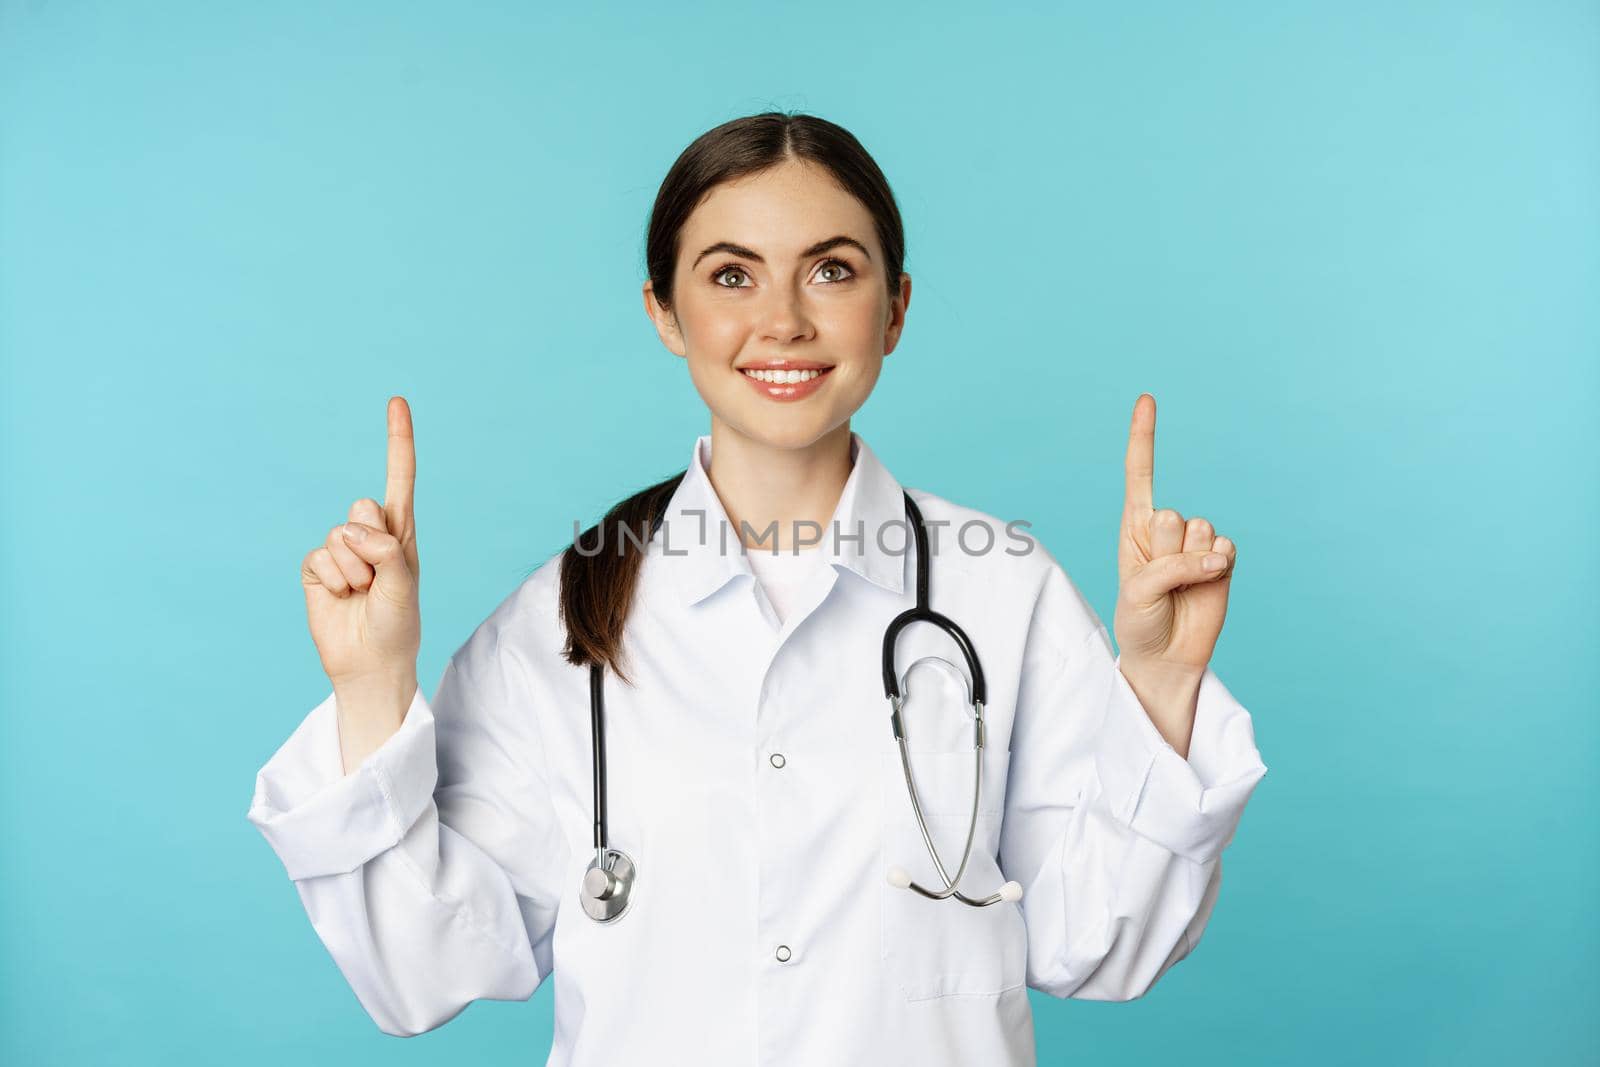 Enthusiastic medical worker, young woman doctor in white coat, stethoscope, showing advertisement, pointing fingers up, standing over torquoise background.